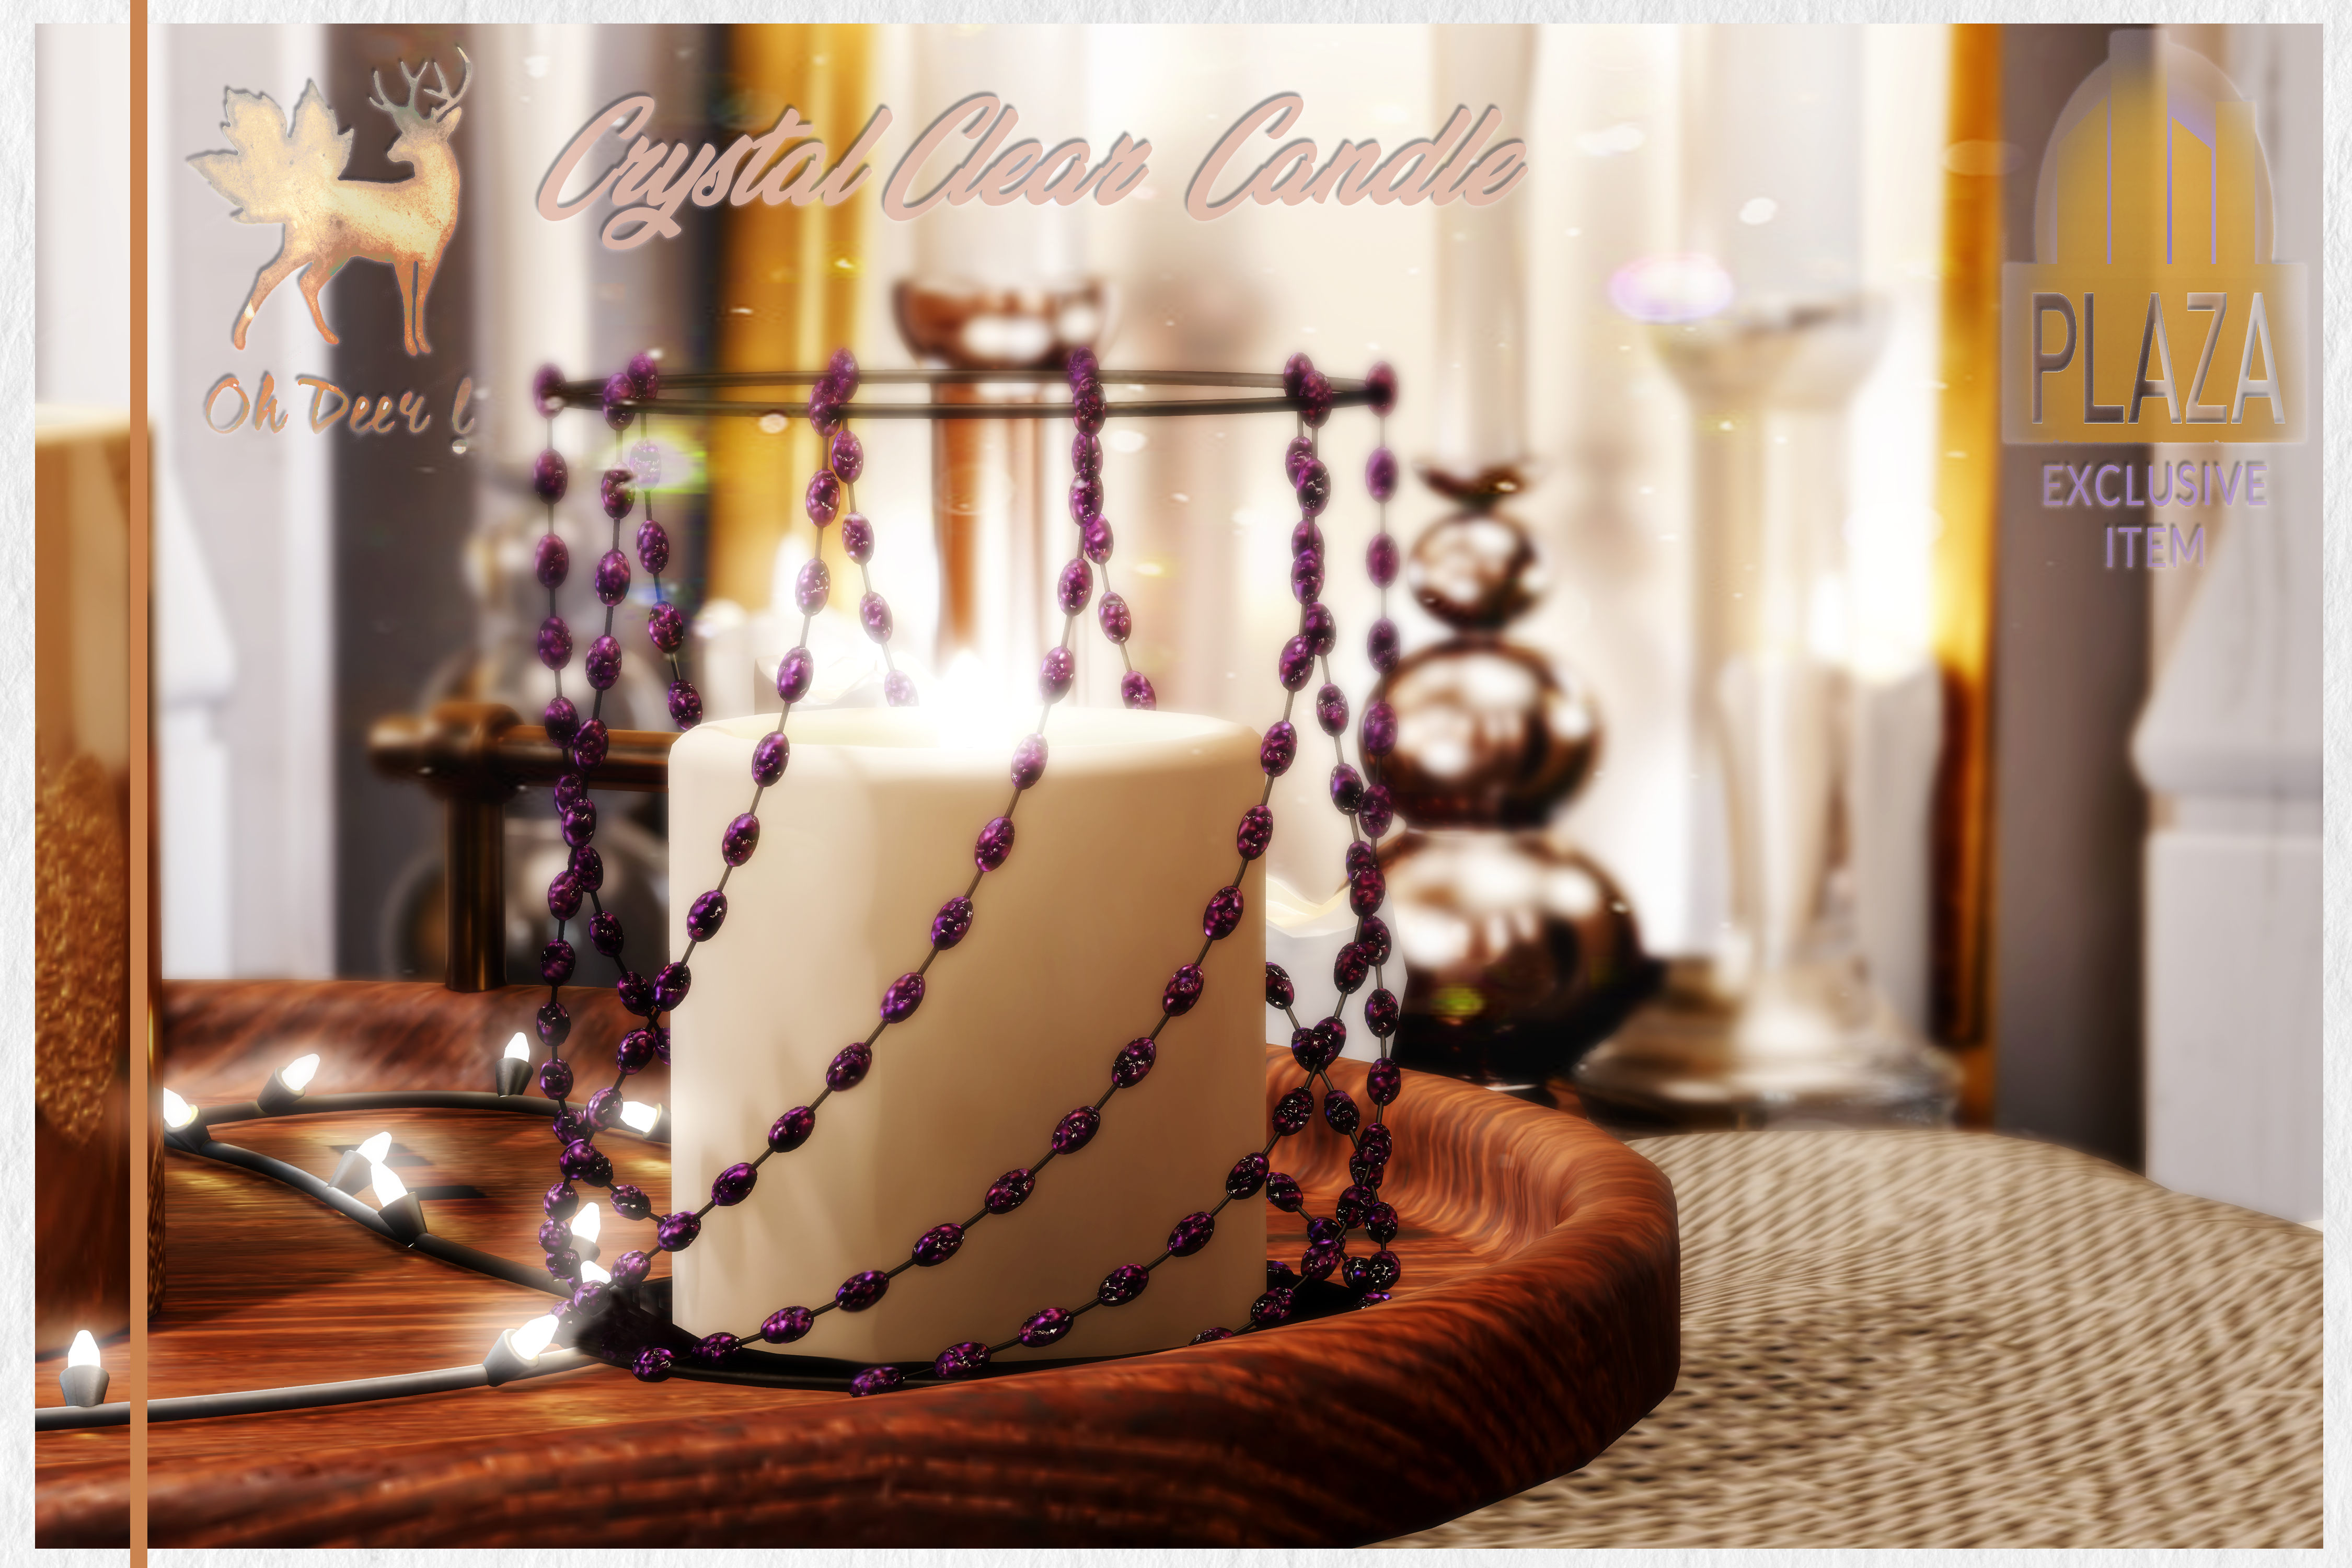 Oh Deer! – Crystal Clear Candle